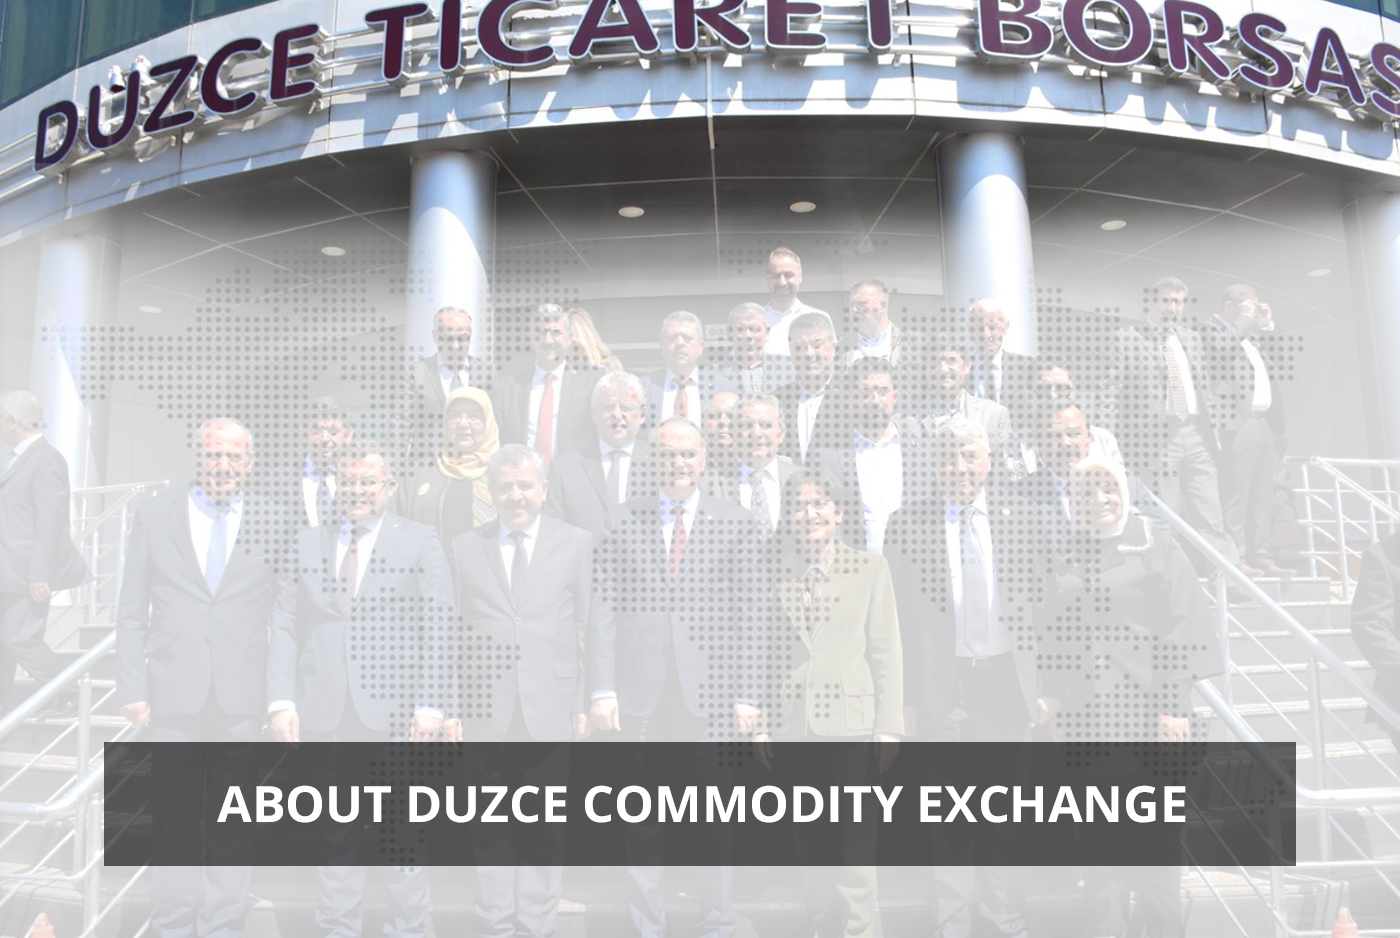 About Duzce Commodity Exchange